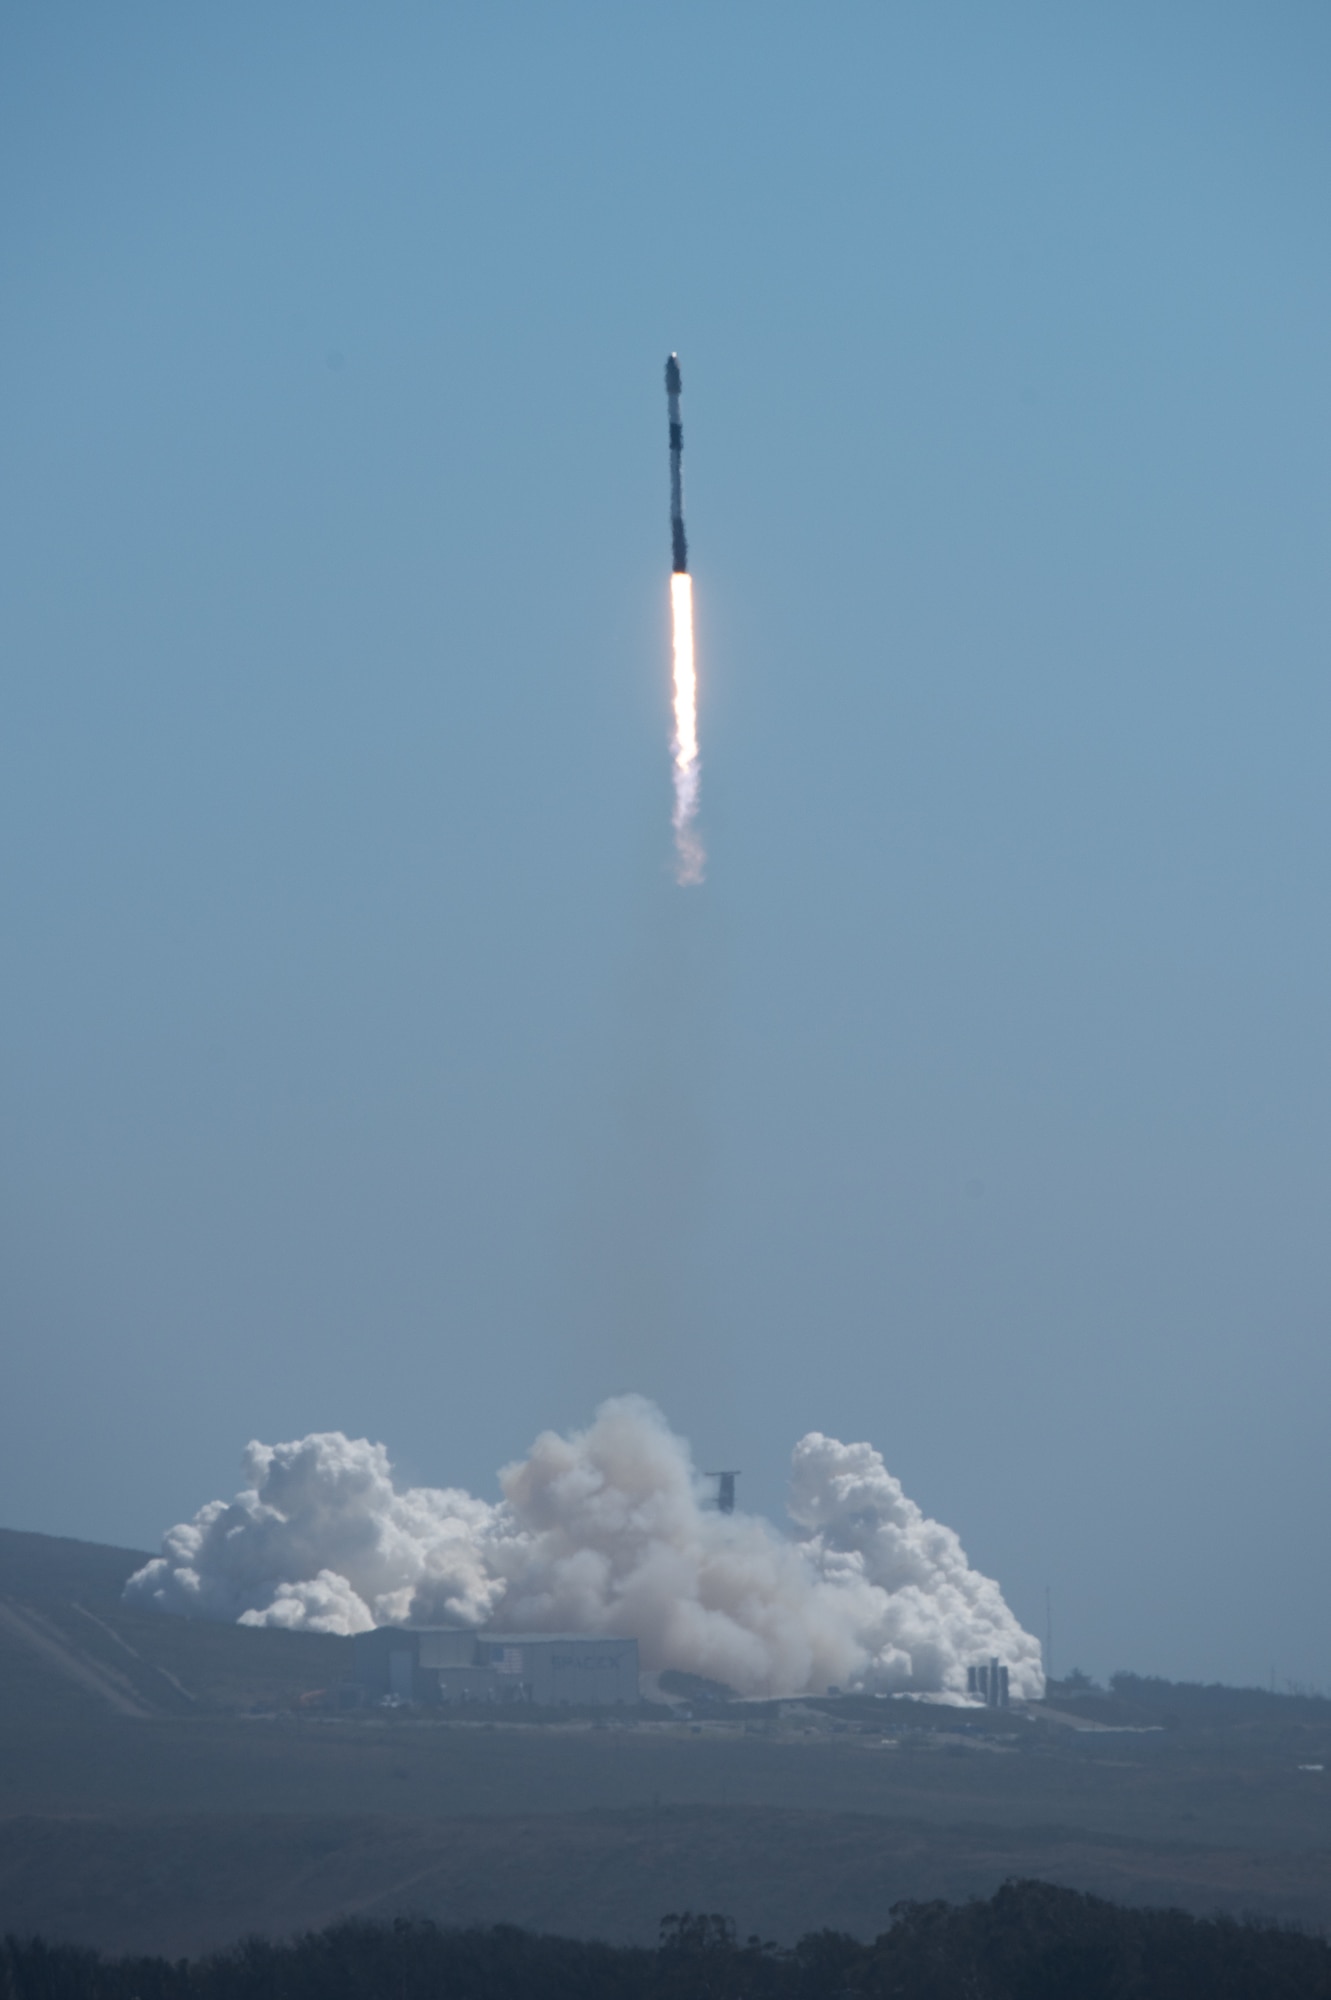 Starlink Mission Launches from Vandenberg